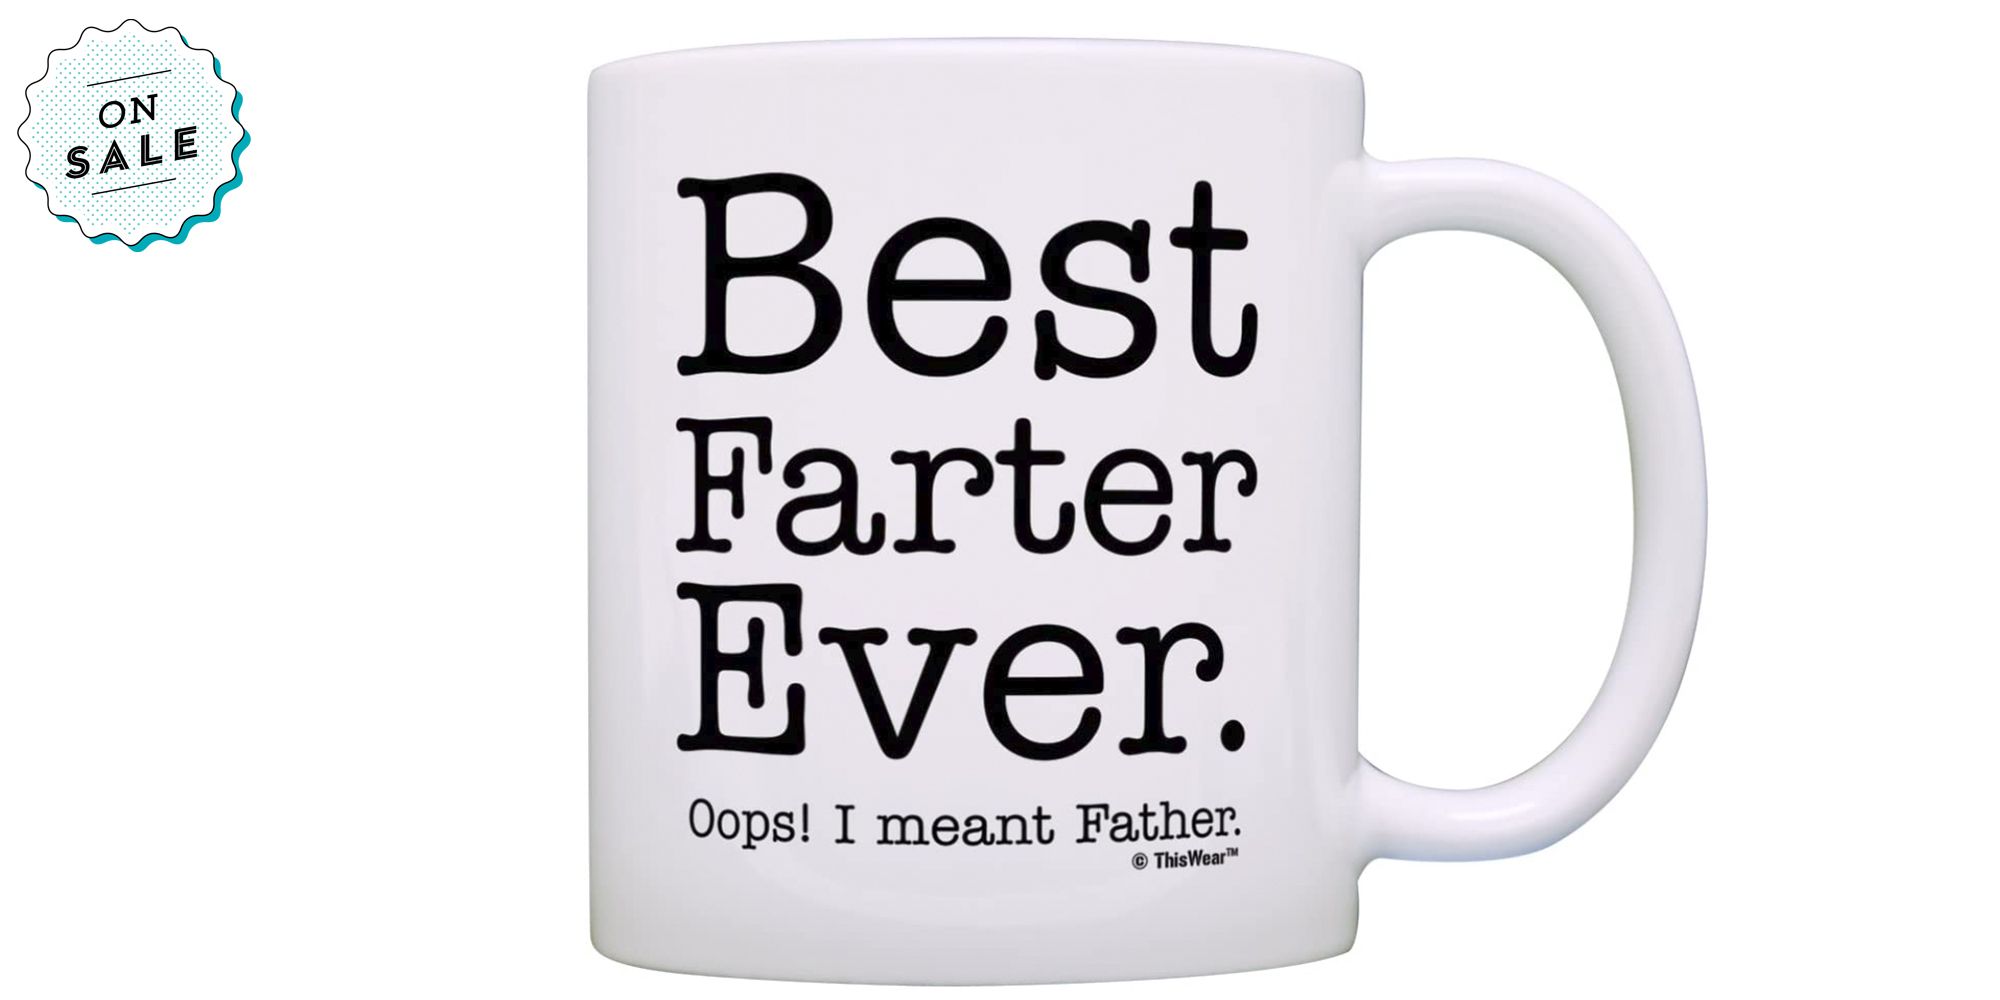 HAPPY BIRTHDAY DADDY superhero dad mug birthday gifts for dad from son Fathers day gift from kids Funny mugs for men hero coffee mug